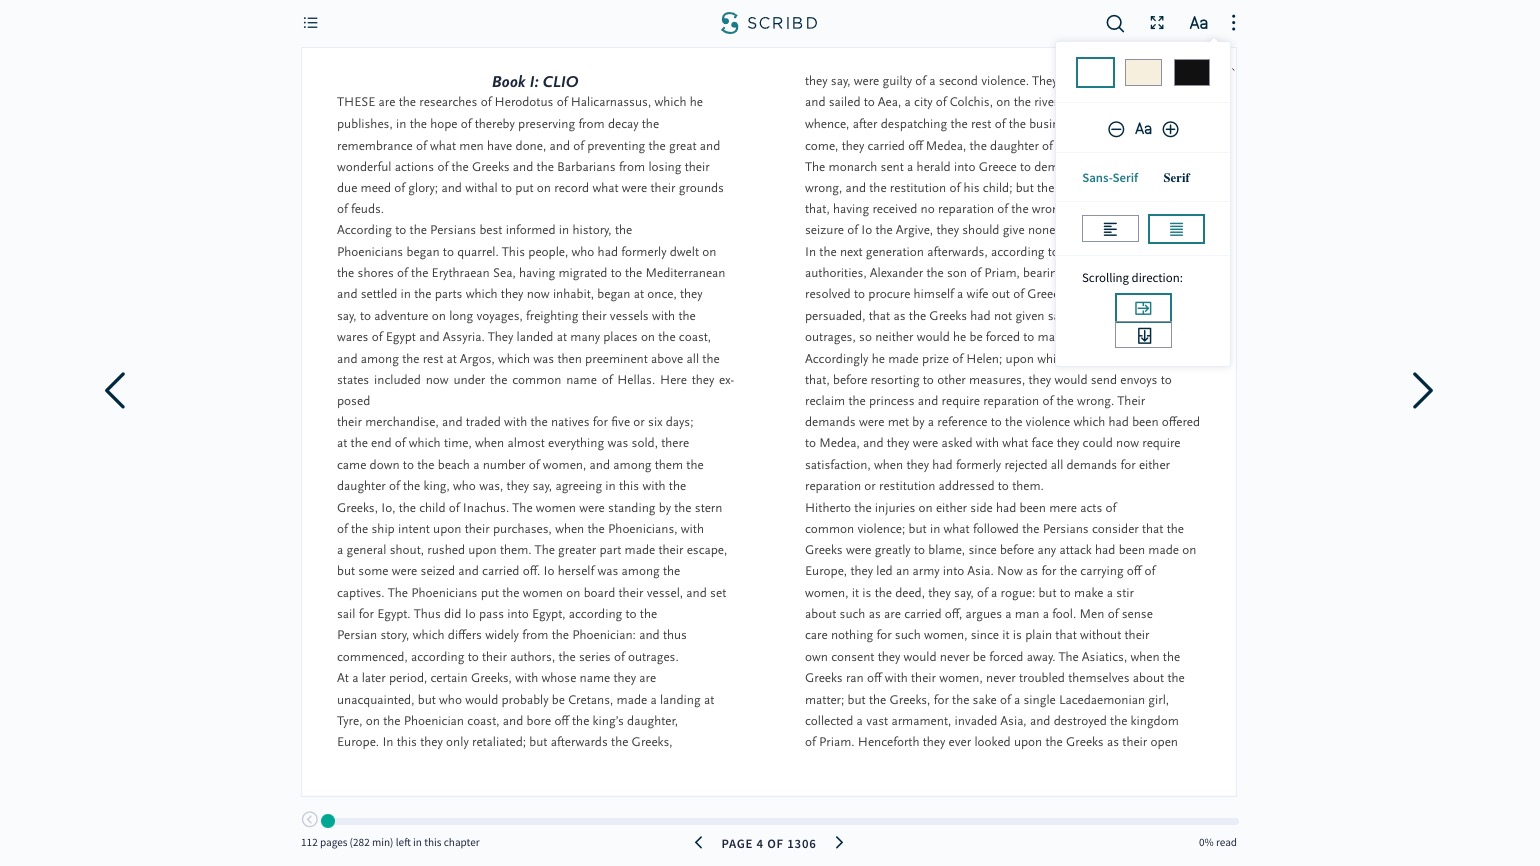 Scribd's browser interface for ebooks